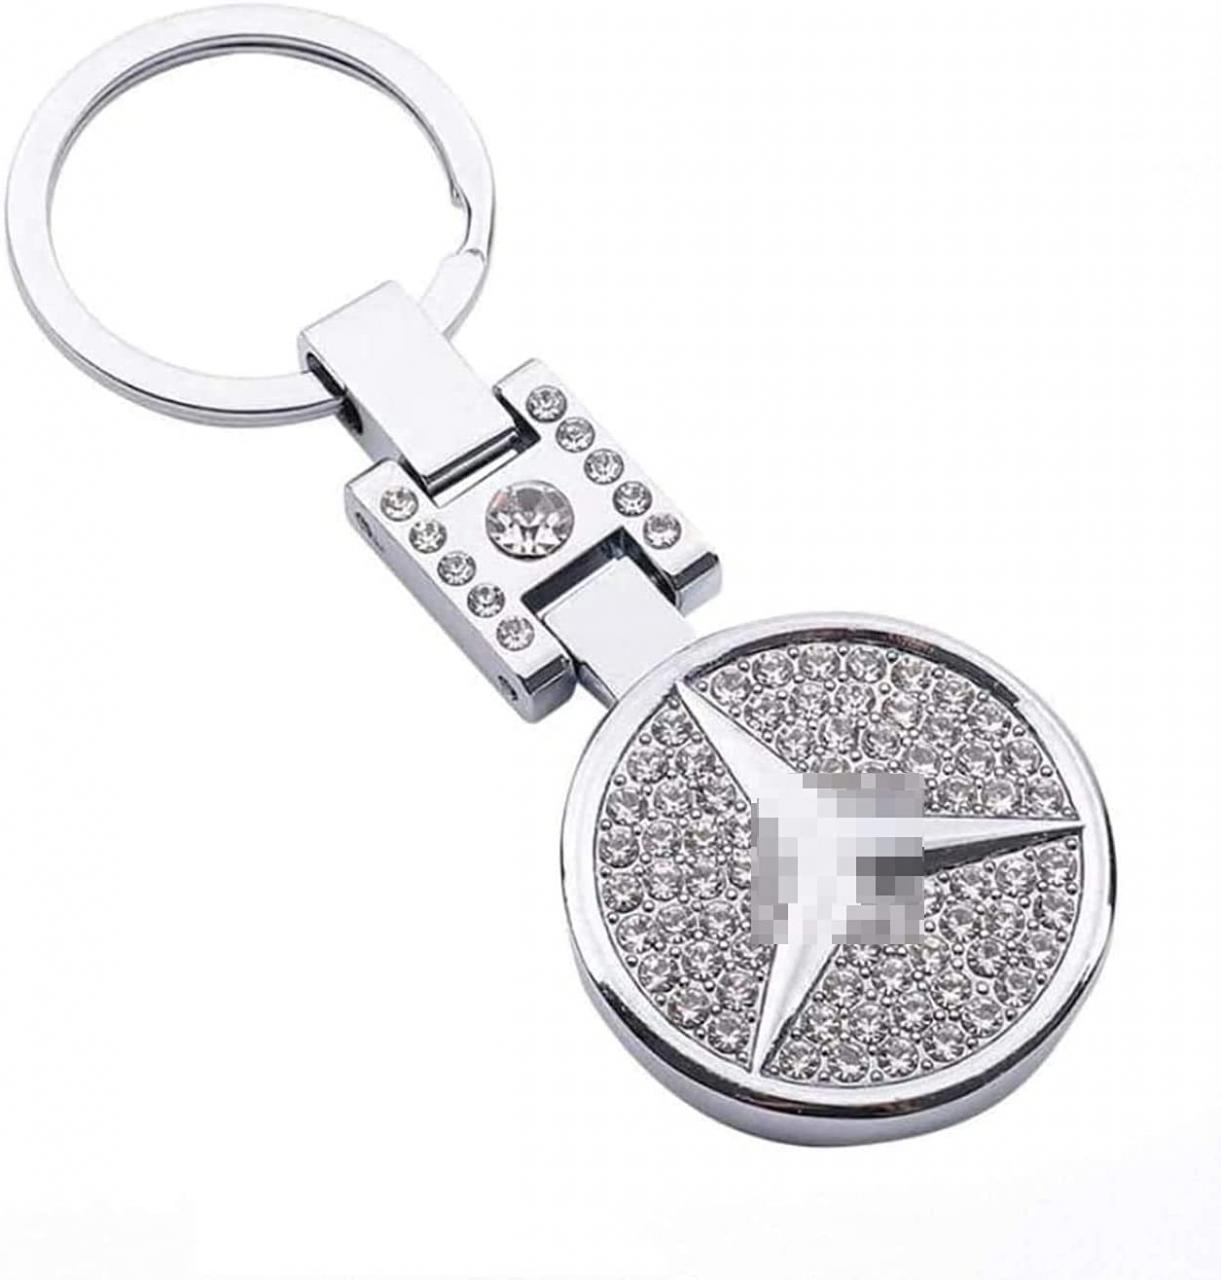 AutoDIY Replacement For Benz car Keychain Car Logo Key Ring 3D Metal Emblem  Pendant Double Side Zircon Crystal Decoration Lanyard Keychains Accessories  for Gifts- Buy Online in Aruba at aruba.desertcart.com. ProductId :